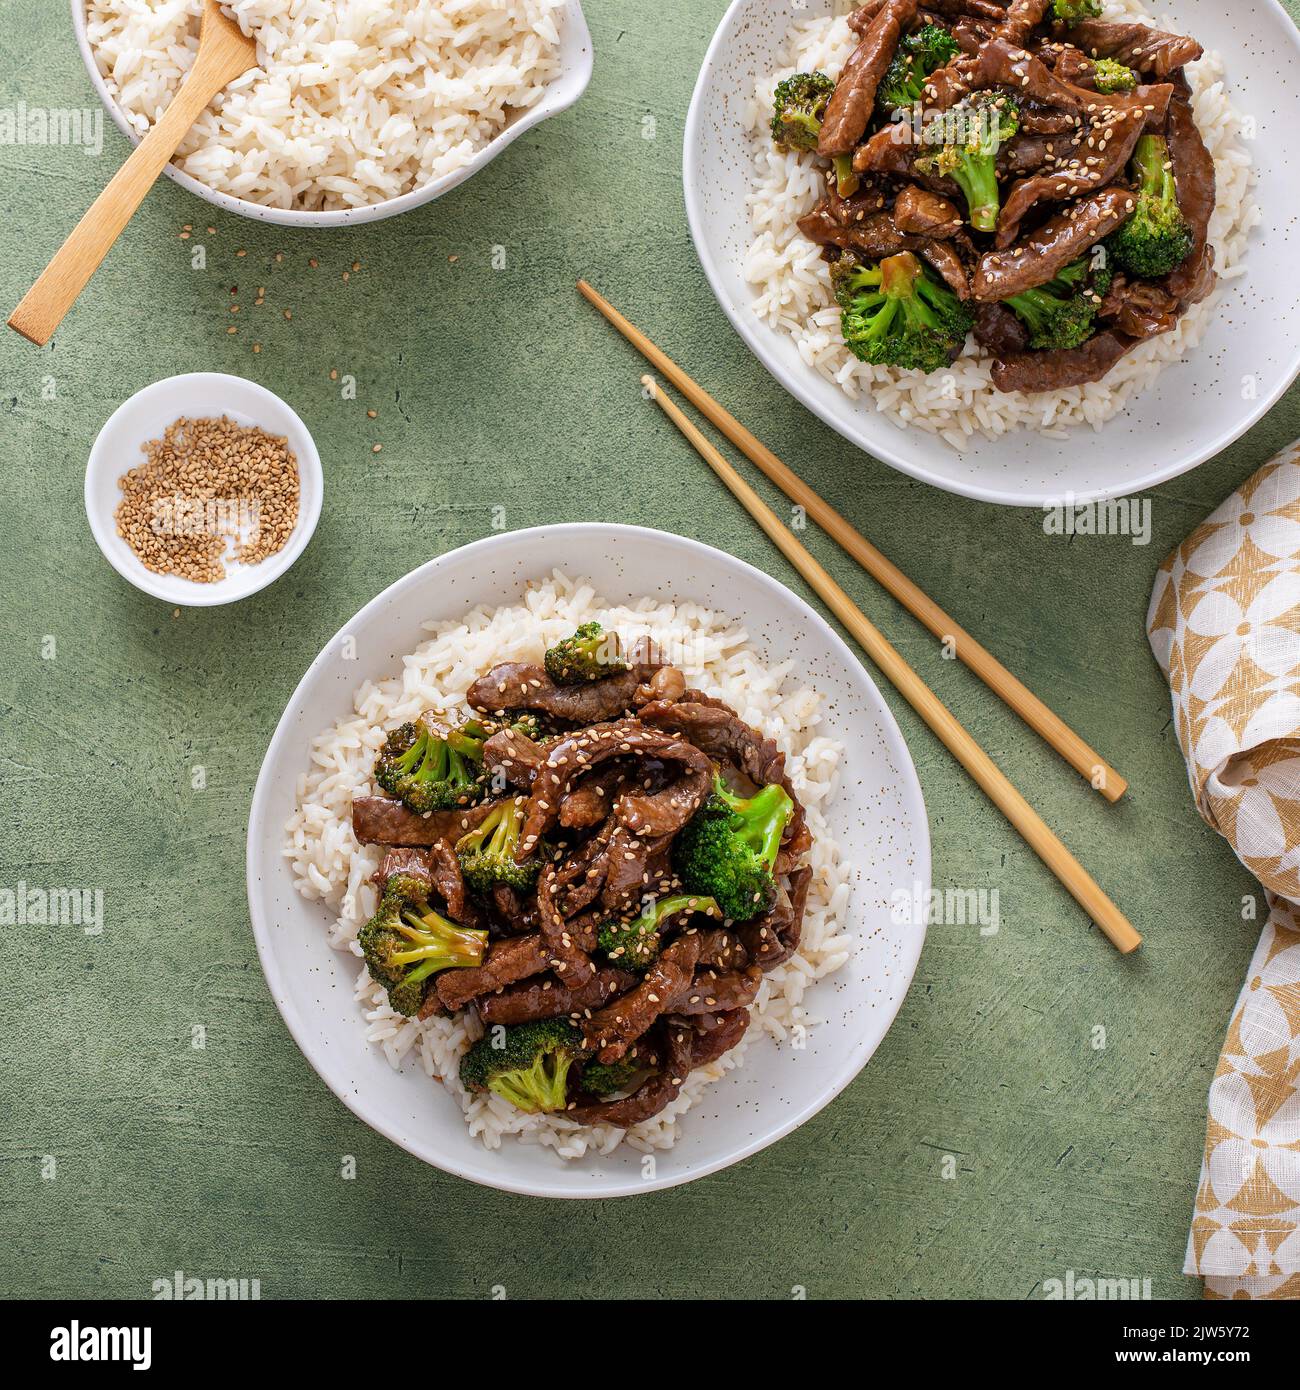 Beef and broccoli stir fry served over rice Stock Photo